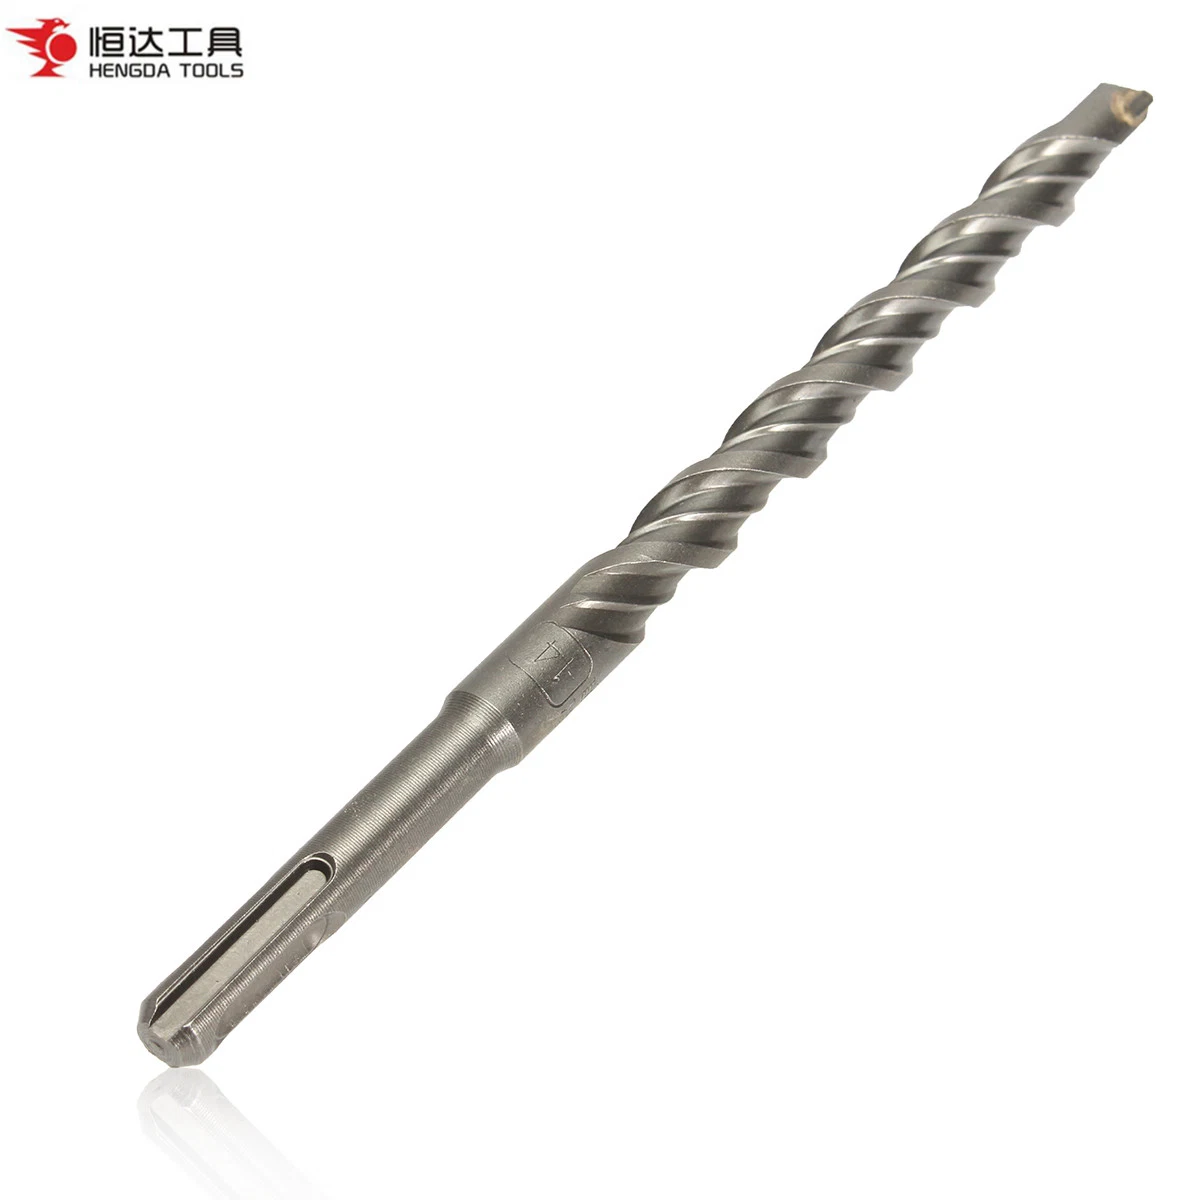 SDS Plus Double Flutes Electric Hammer Drill Bits for Rock Stone